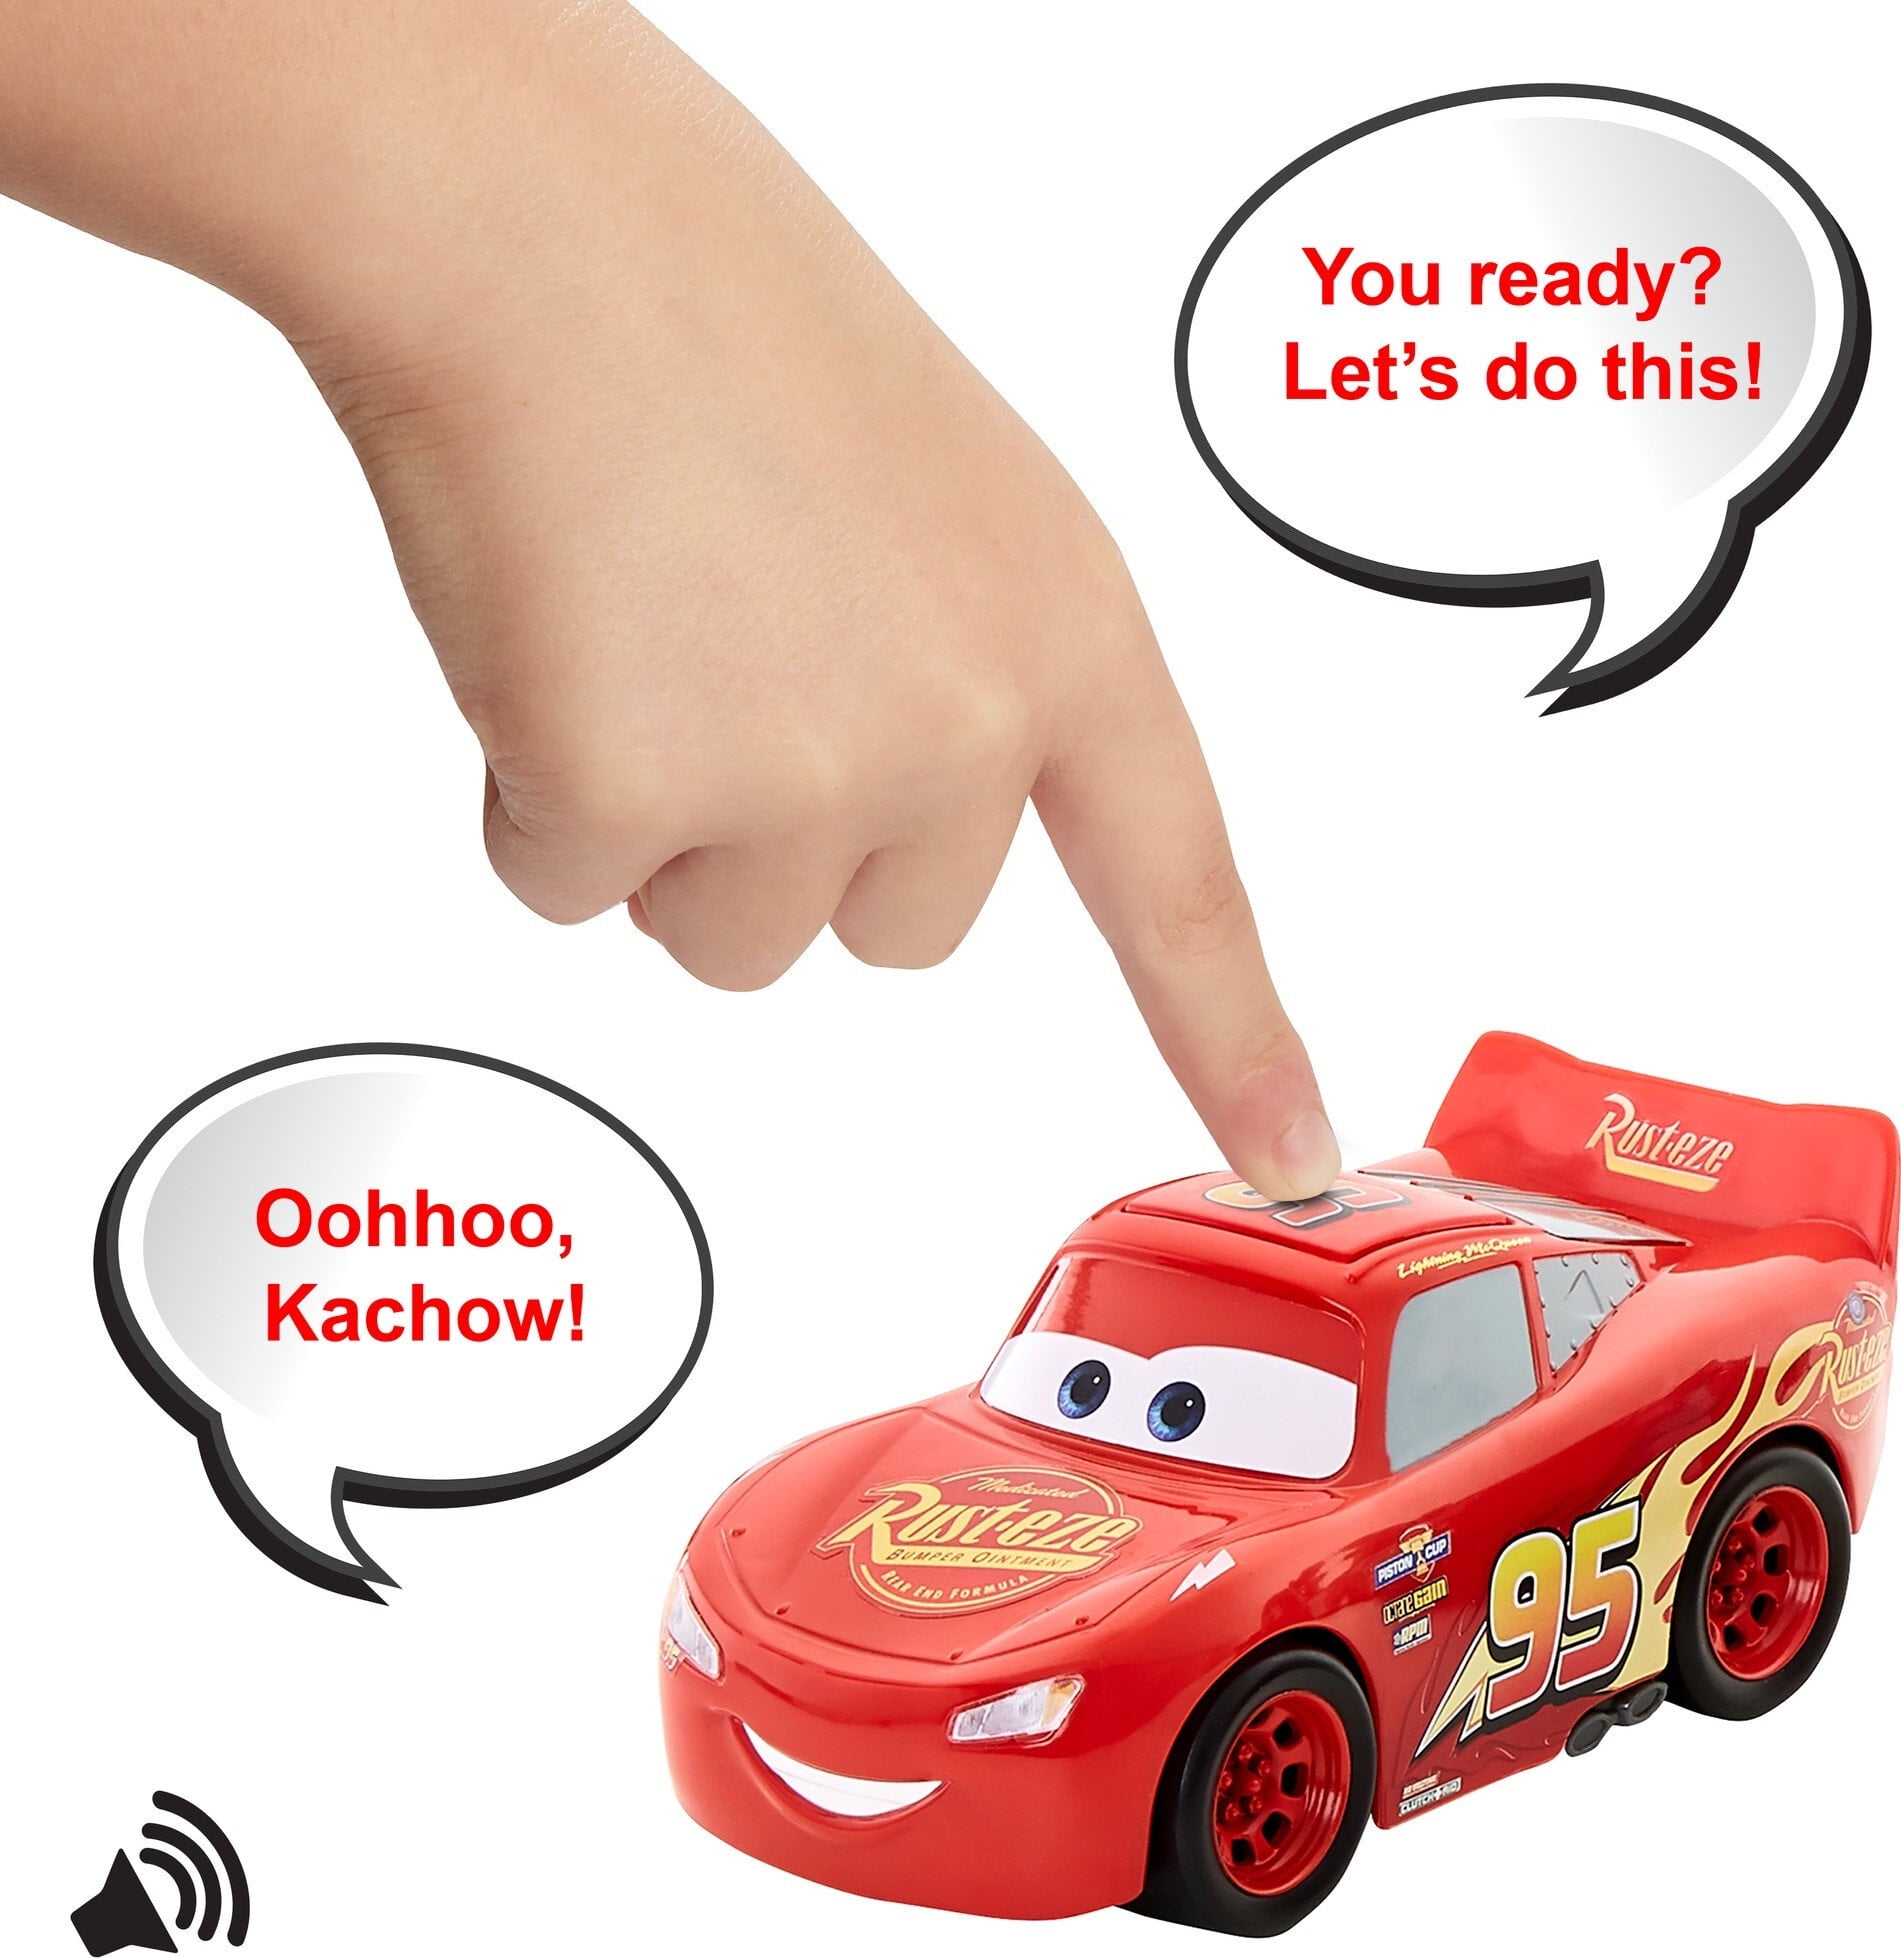 Disney and Pixar Cars Track Talkers Lightning McQueen Talking Toy Car, 5.5  inch Collectible